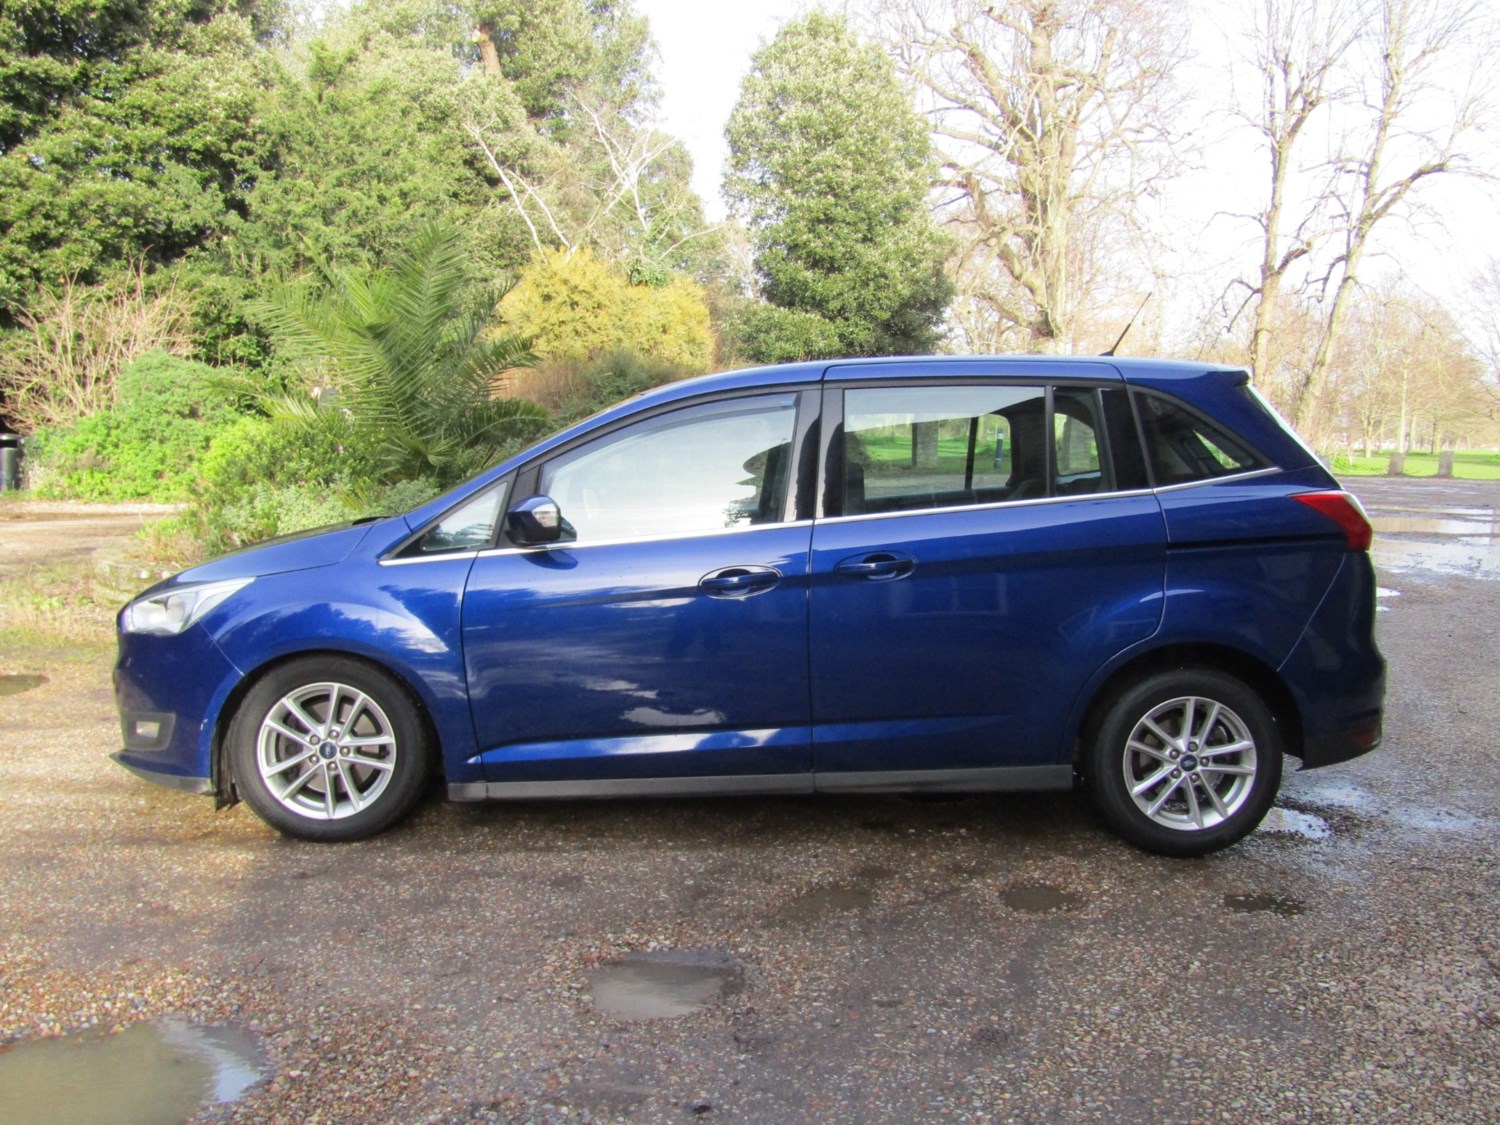 2016 (66) Ford Grand C-Max 1.5 TDCi Zetec 5dr Powershift For Sale In Broadstairs, Kent